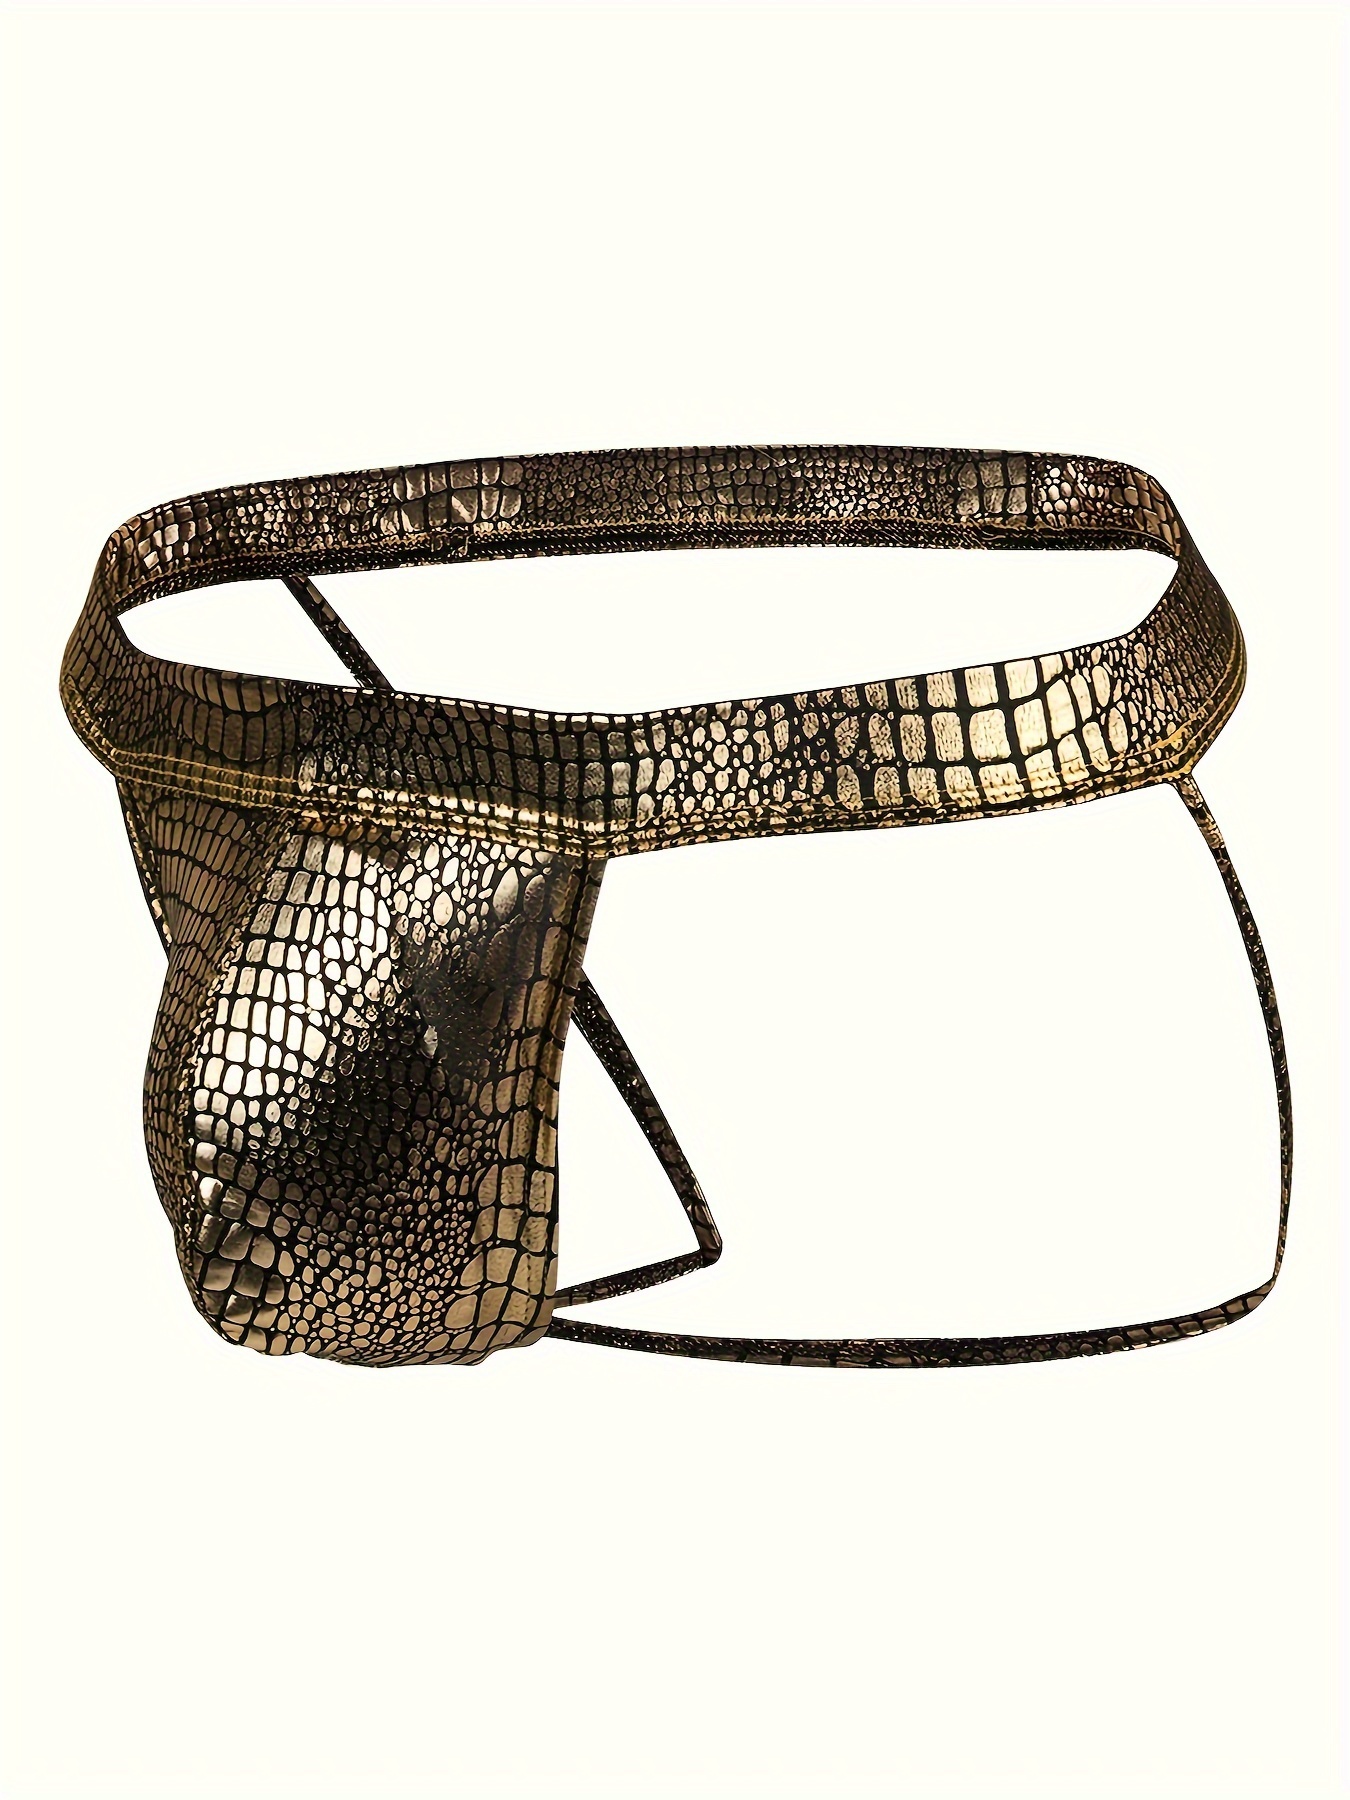 Athletic Trunk Snake - Provocative - C4M